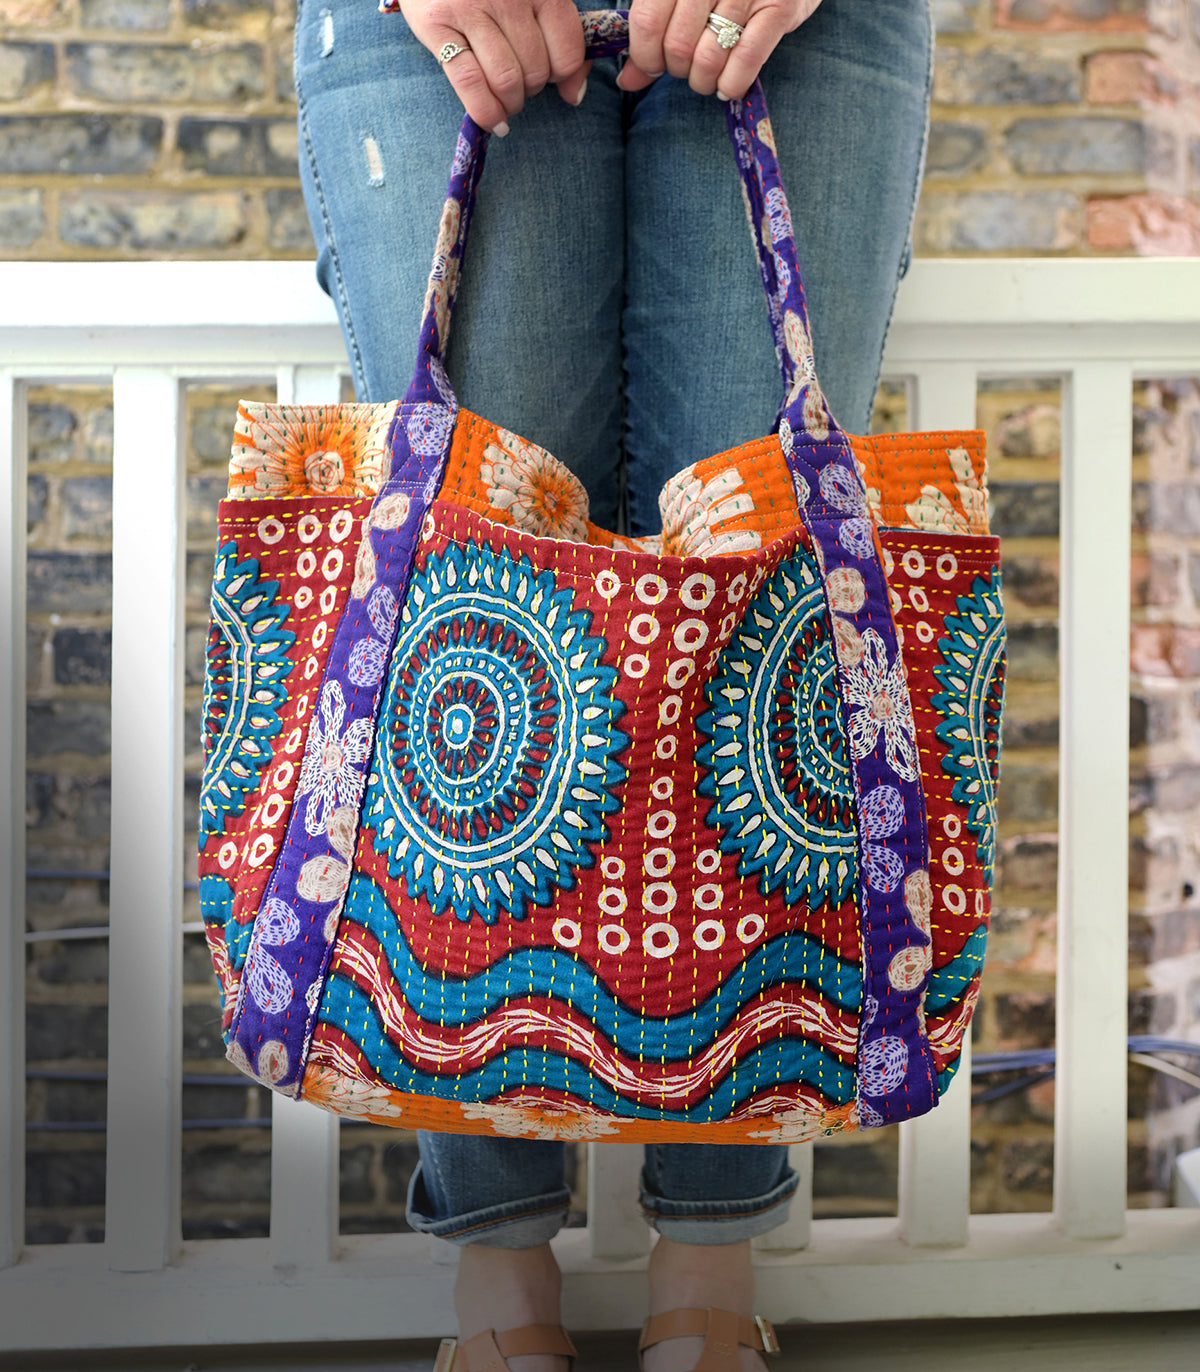 A woman holds a vibrant, patterned bag down by her legs.